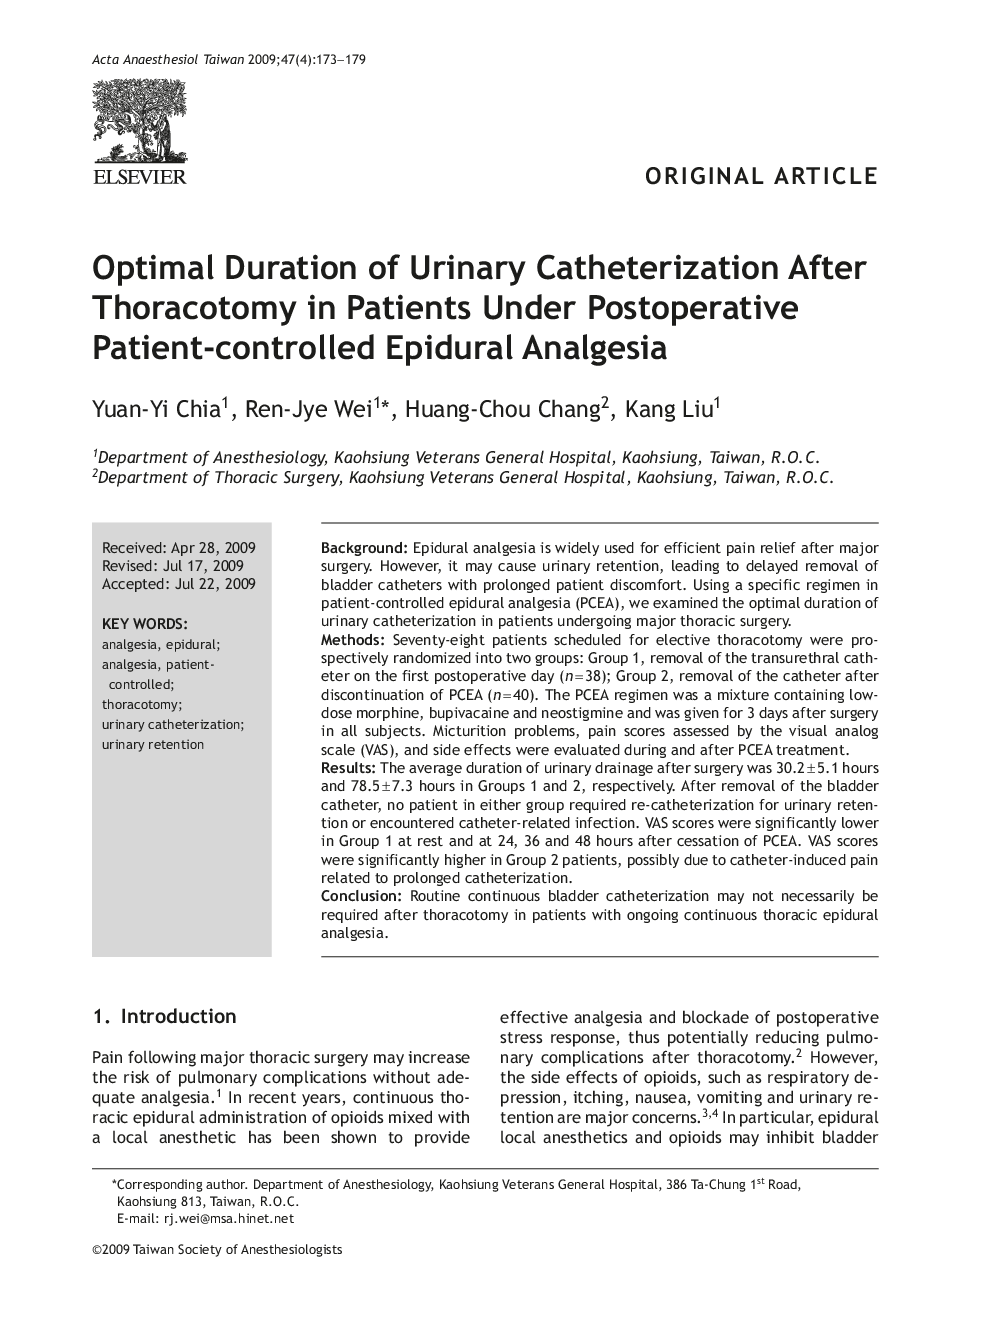 Optimal Duration of Urinary Catheterization After Thoracotomy in Patients Under Postoperative Patient-controlled Epidural Analgesia